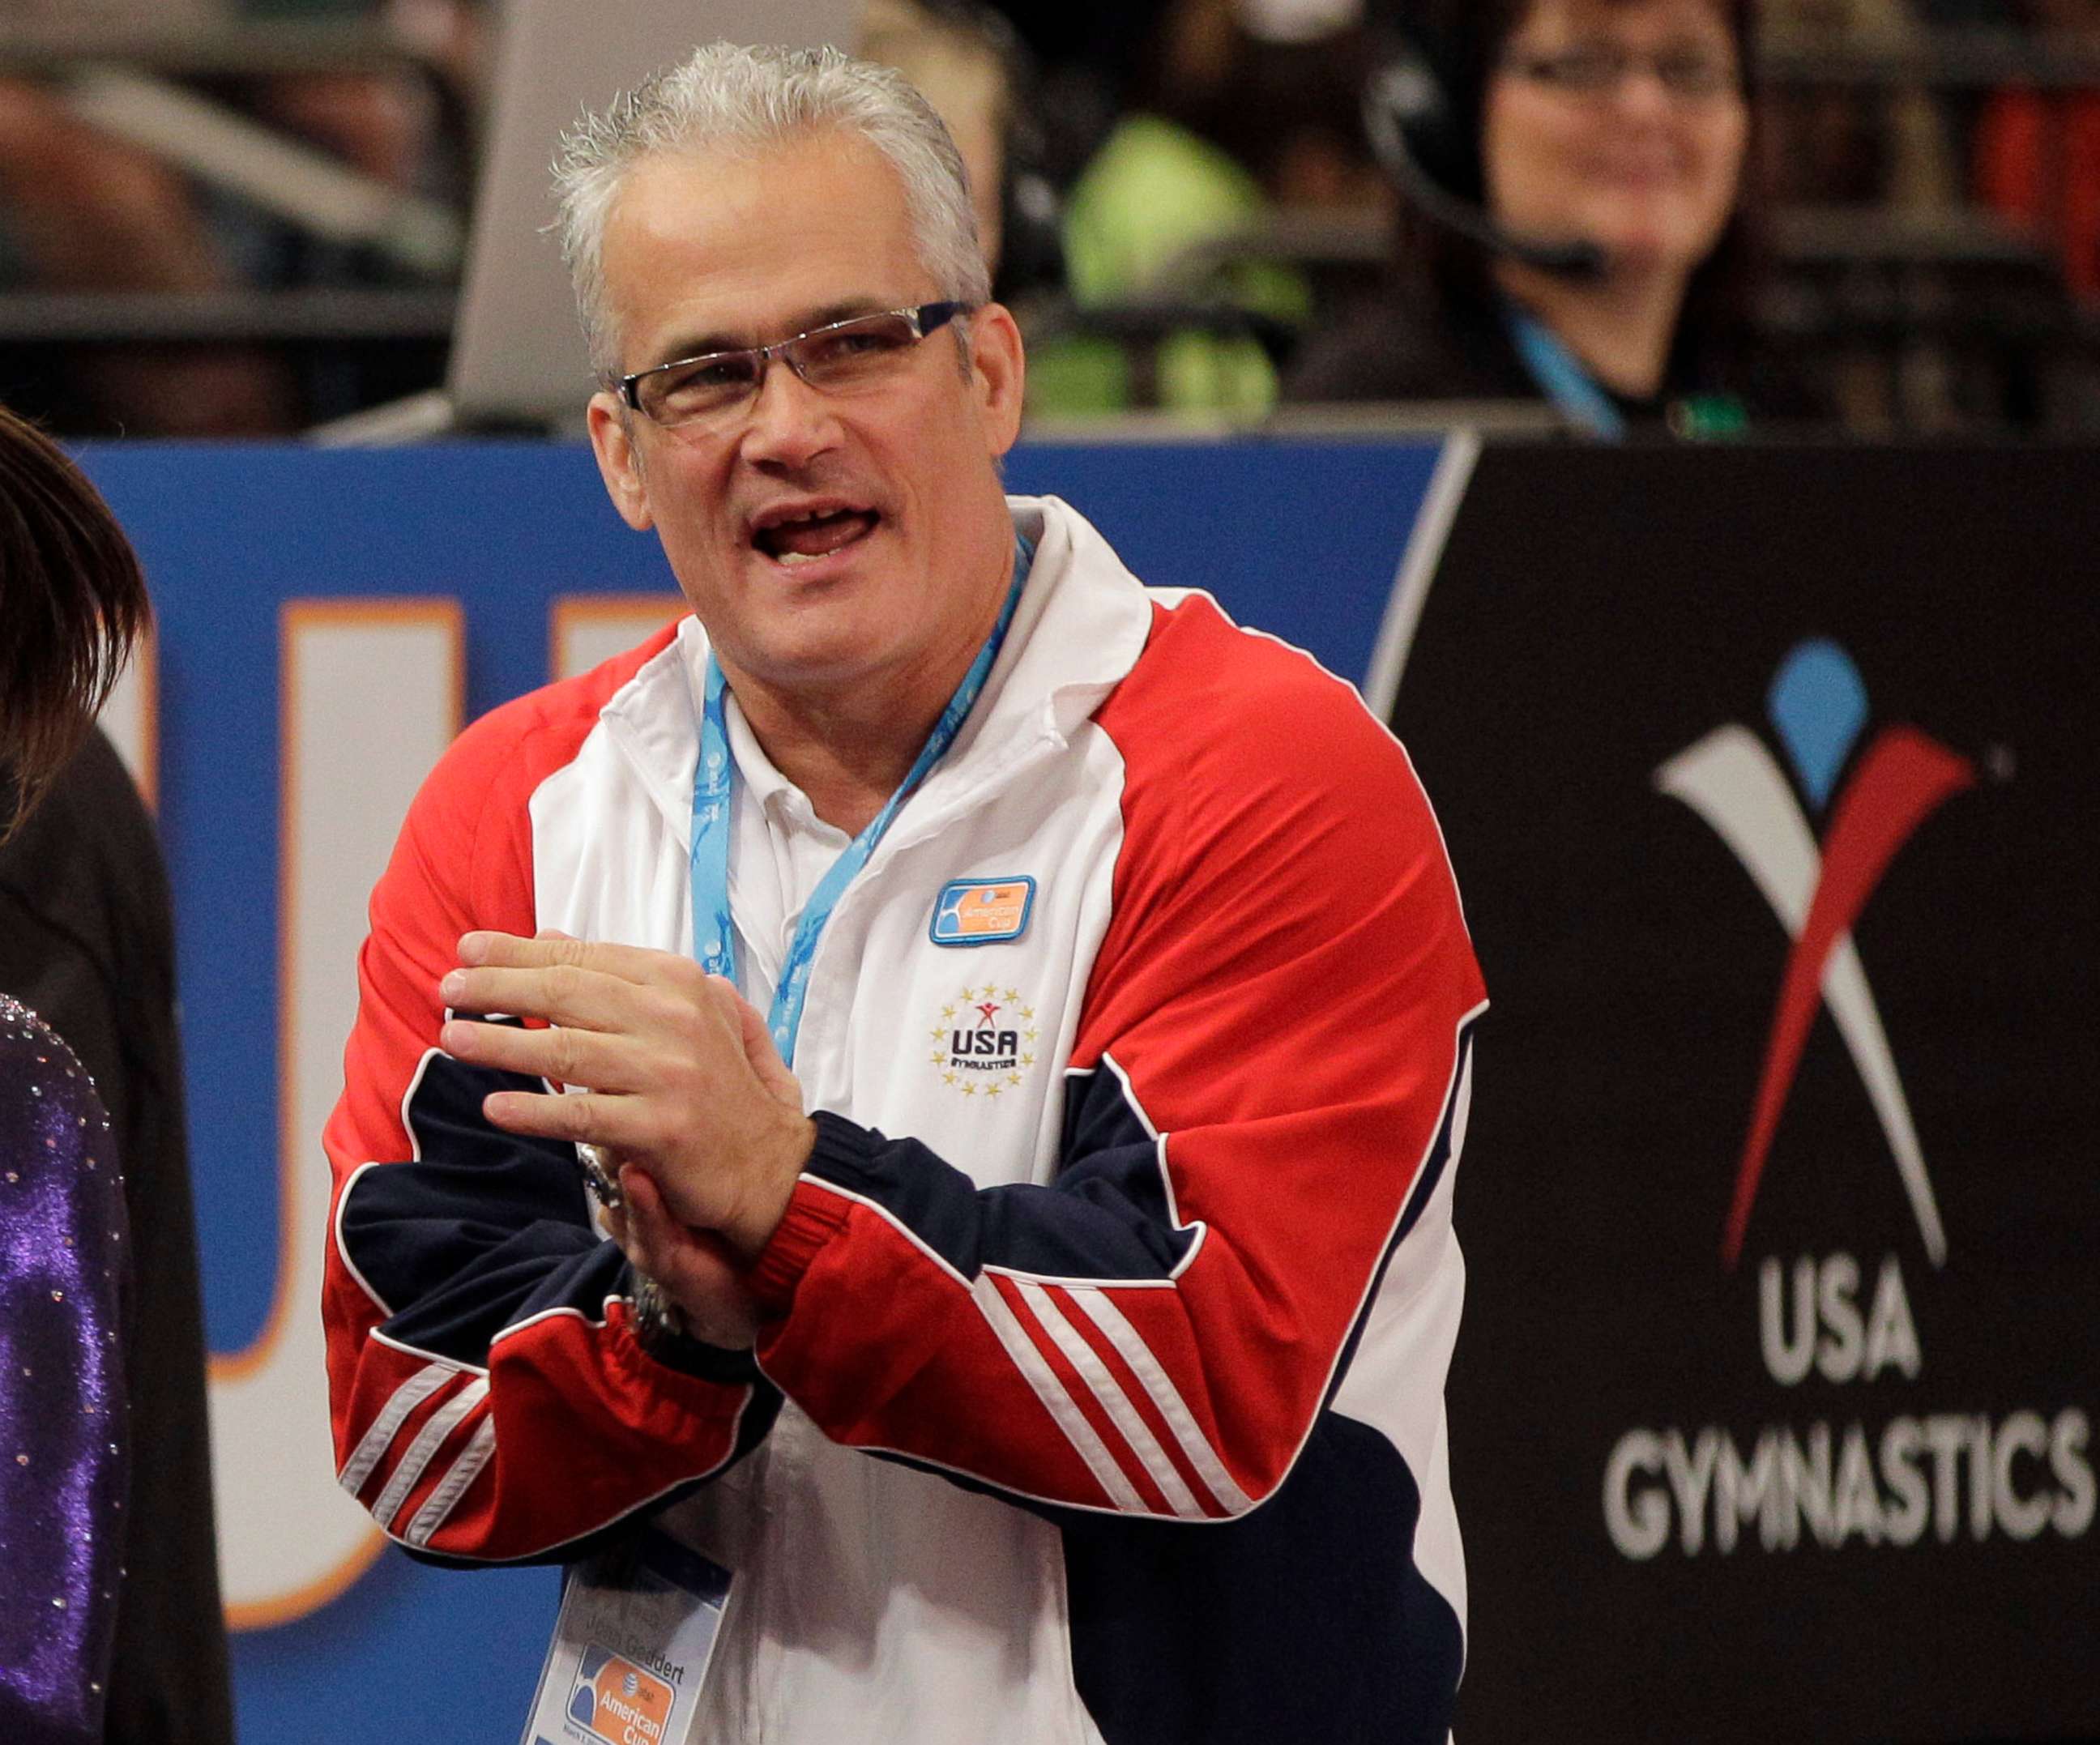 PHOTO: Gymnastics coach John Geddert is seen at the American Cup gymnastics meet at Madison Square Garden in New York, March 3, 2012.